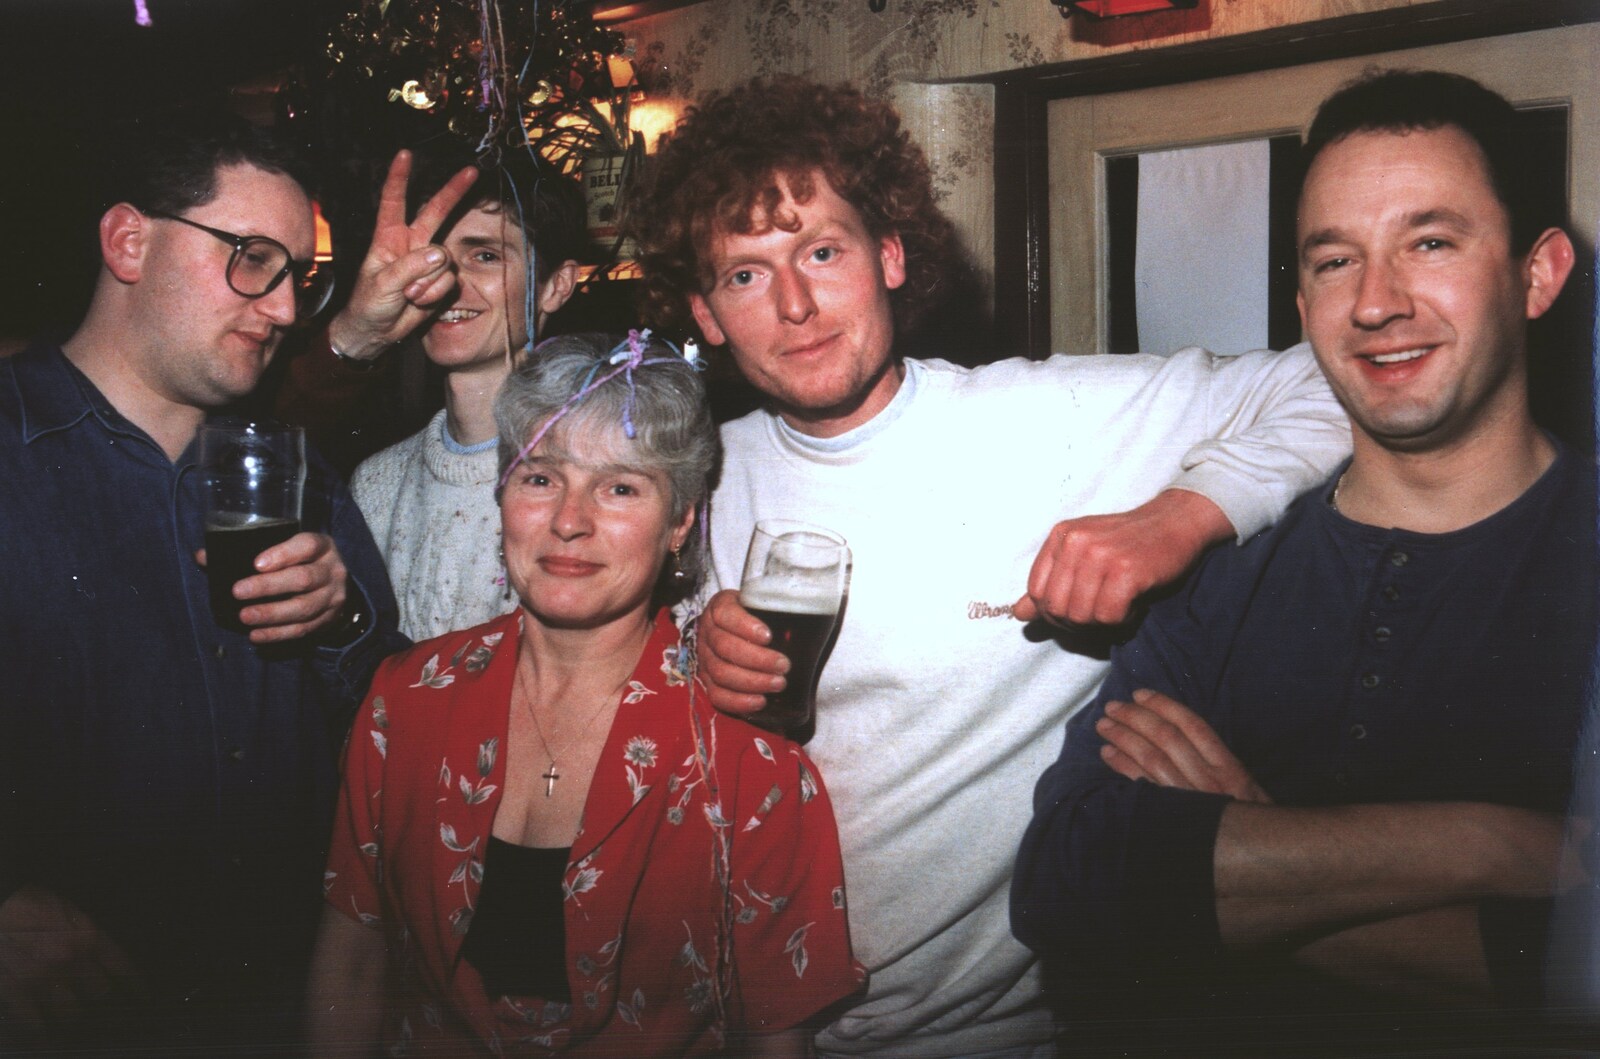 Graham, Jon, Spammy, Wavy and DH from Brome Swan Christmas, Suffolk - December 1998